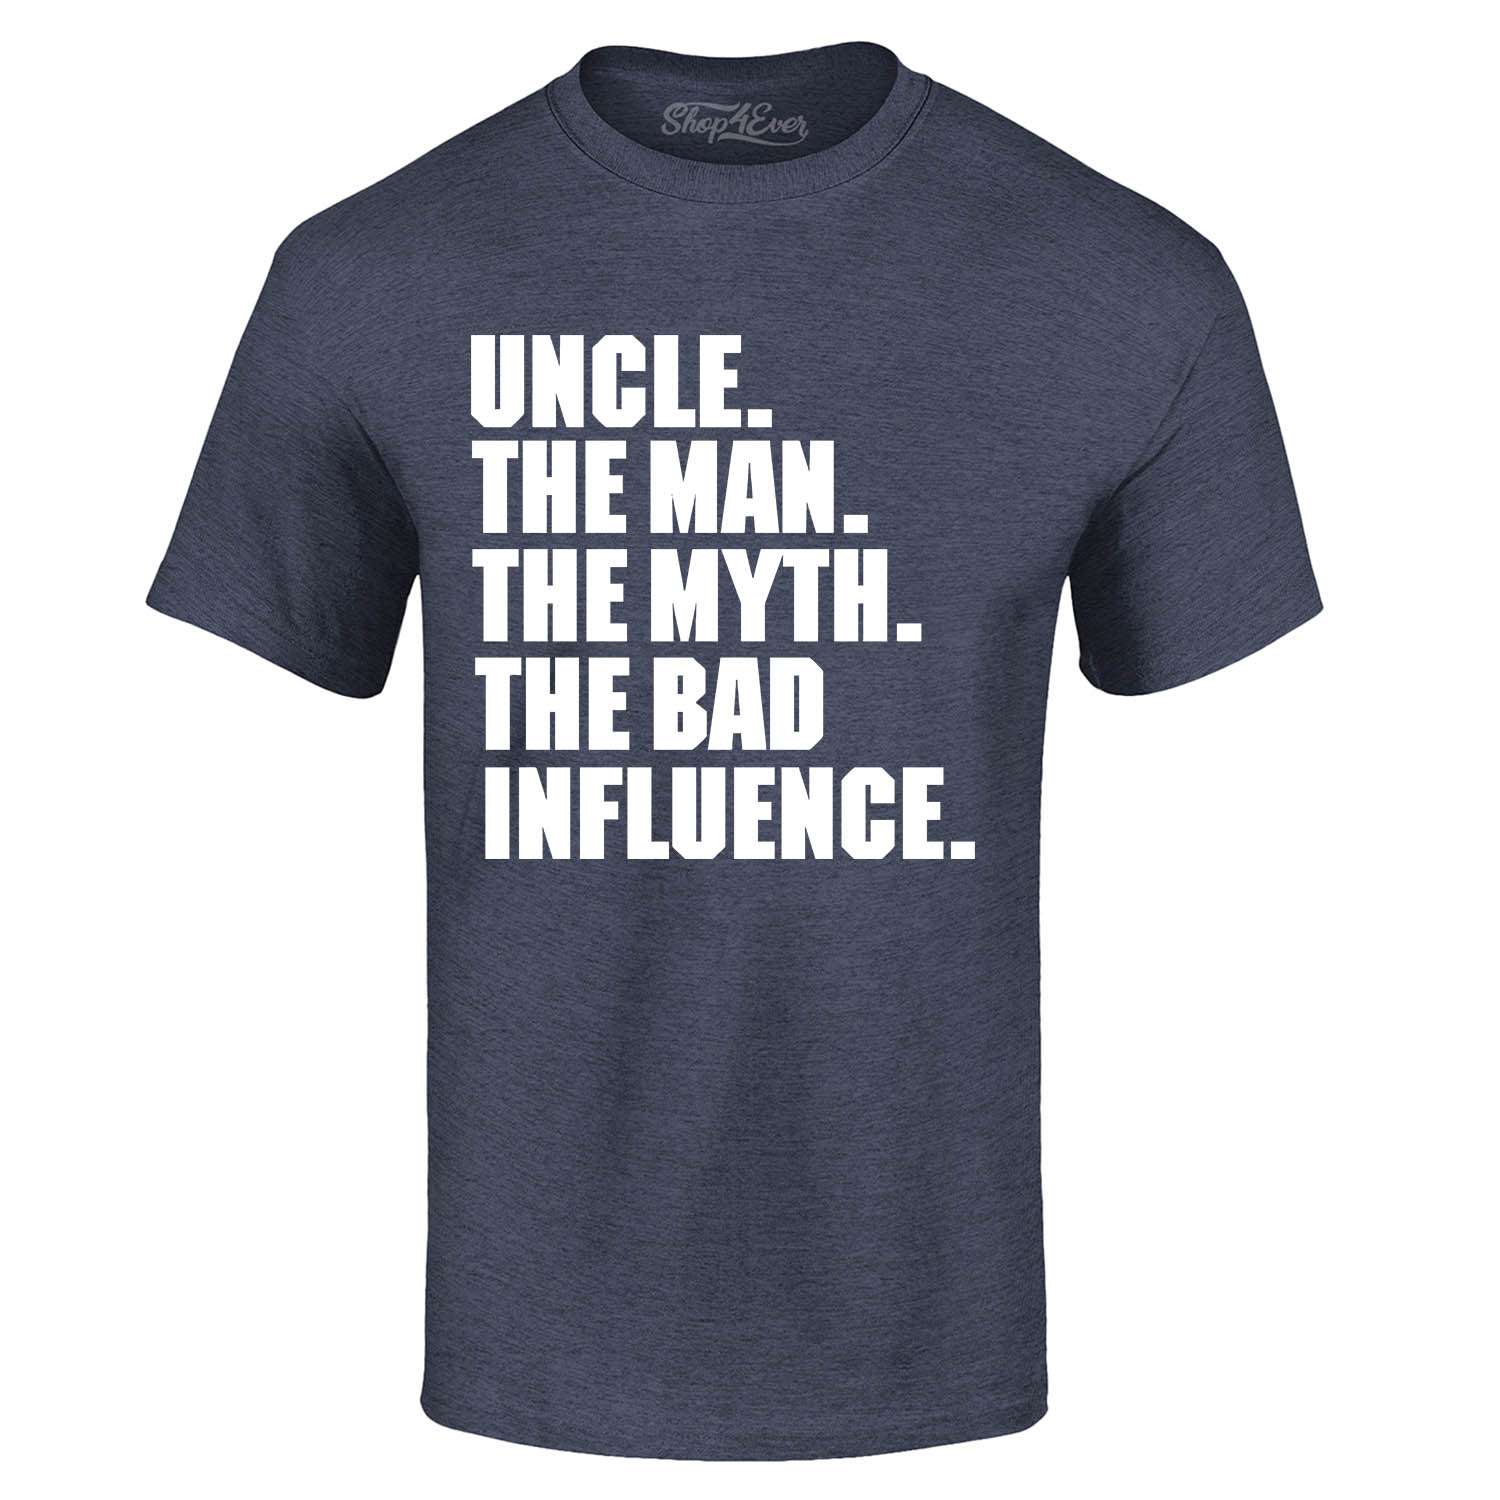 hoodies Uncle Man Myth Bad Influence Funny Shirt Vintage Uncle Shirt Sweatshirt Funny Gift for Uncle uncle birthday gift